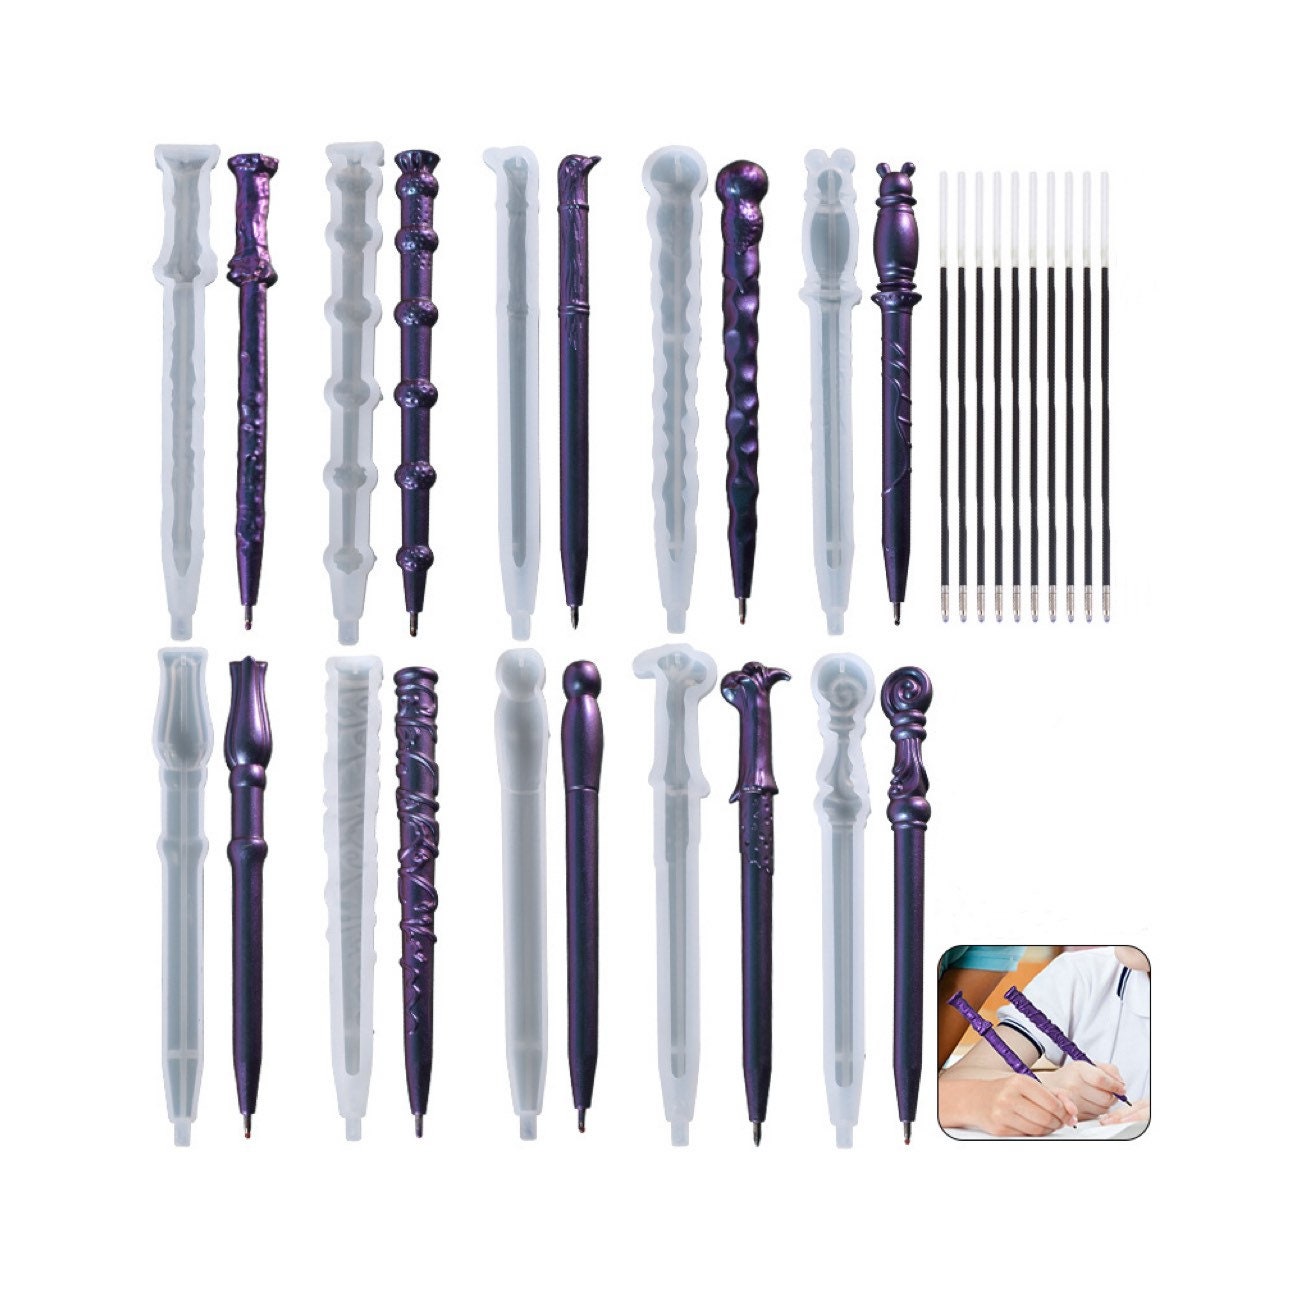 New Resin Magic Wand Pen Mold, Make Resin Pens with Charms